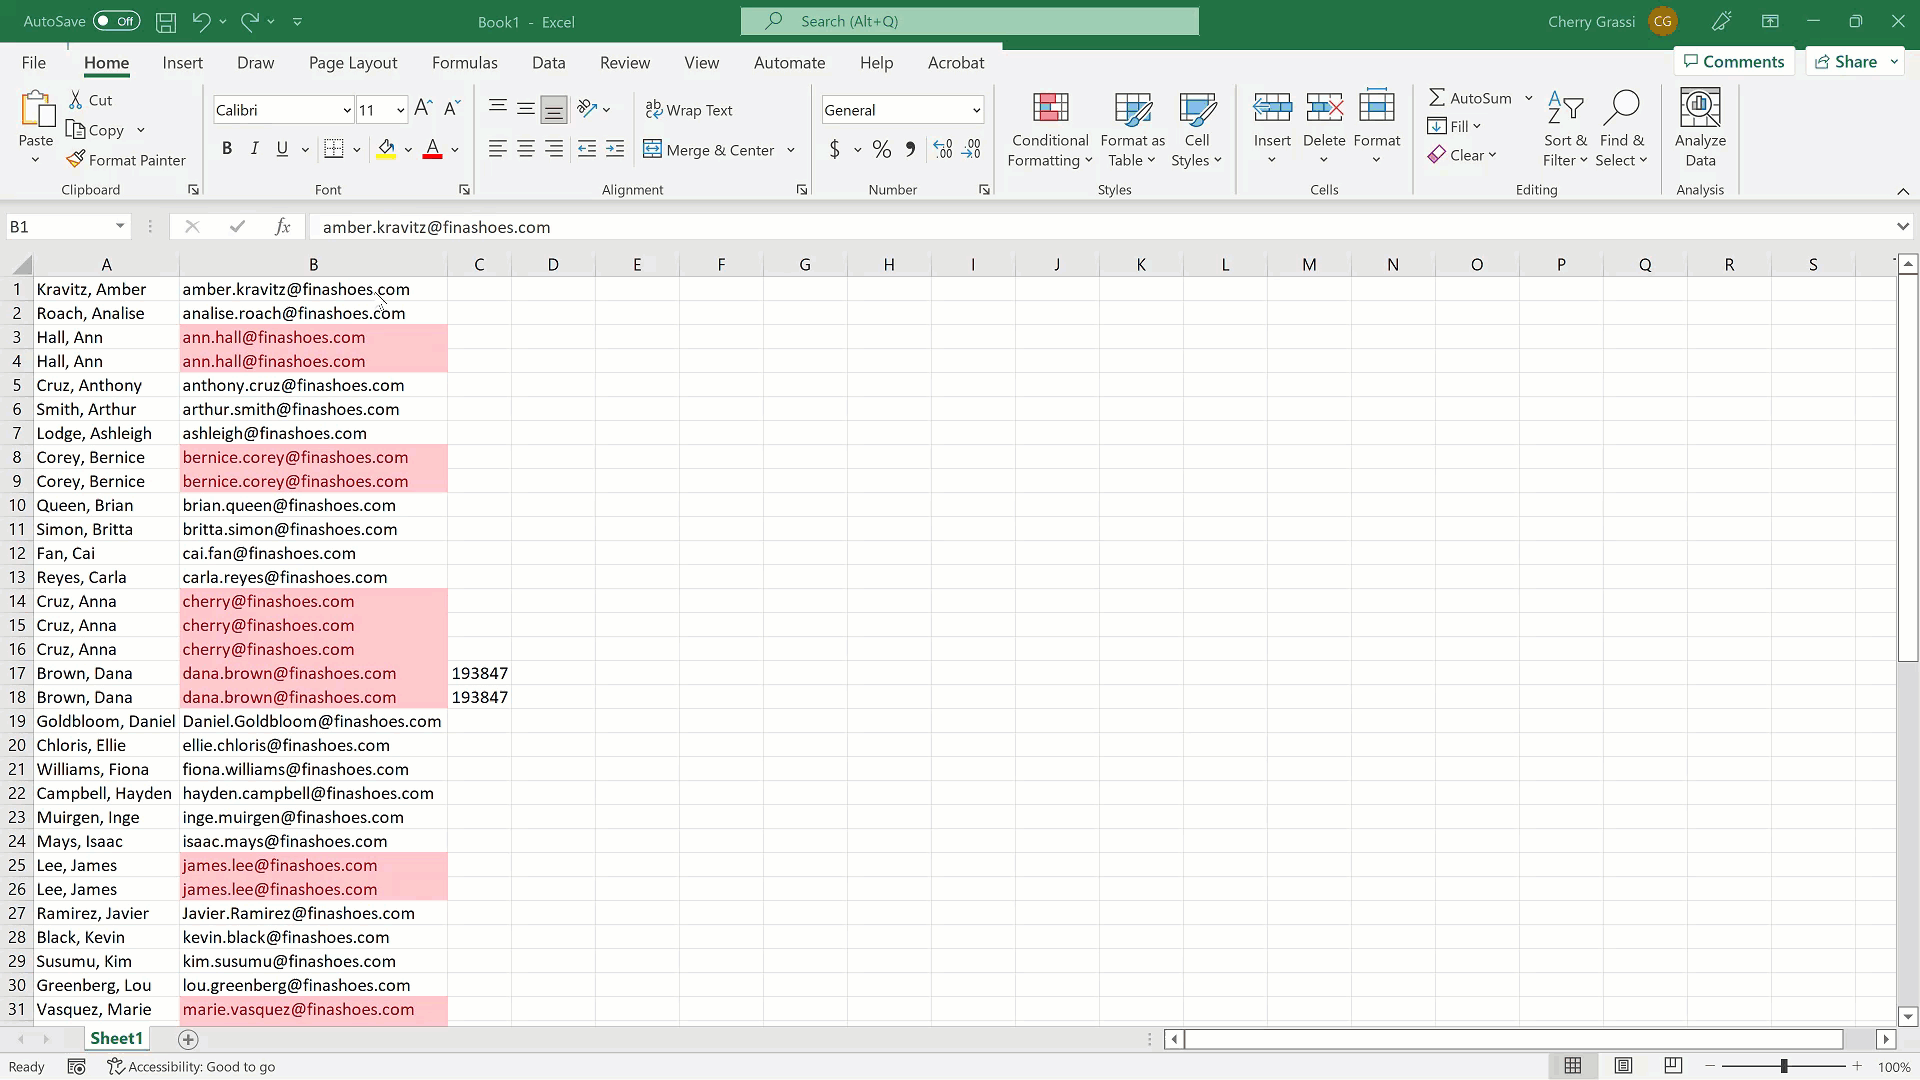 Excel - Sort By Cell Color 20221130